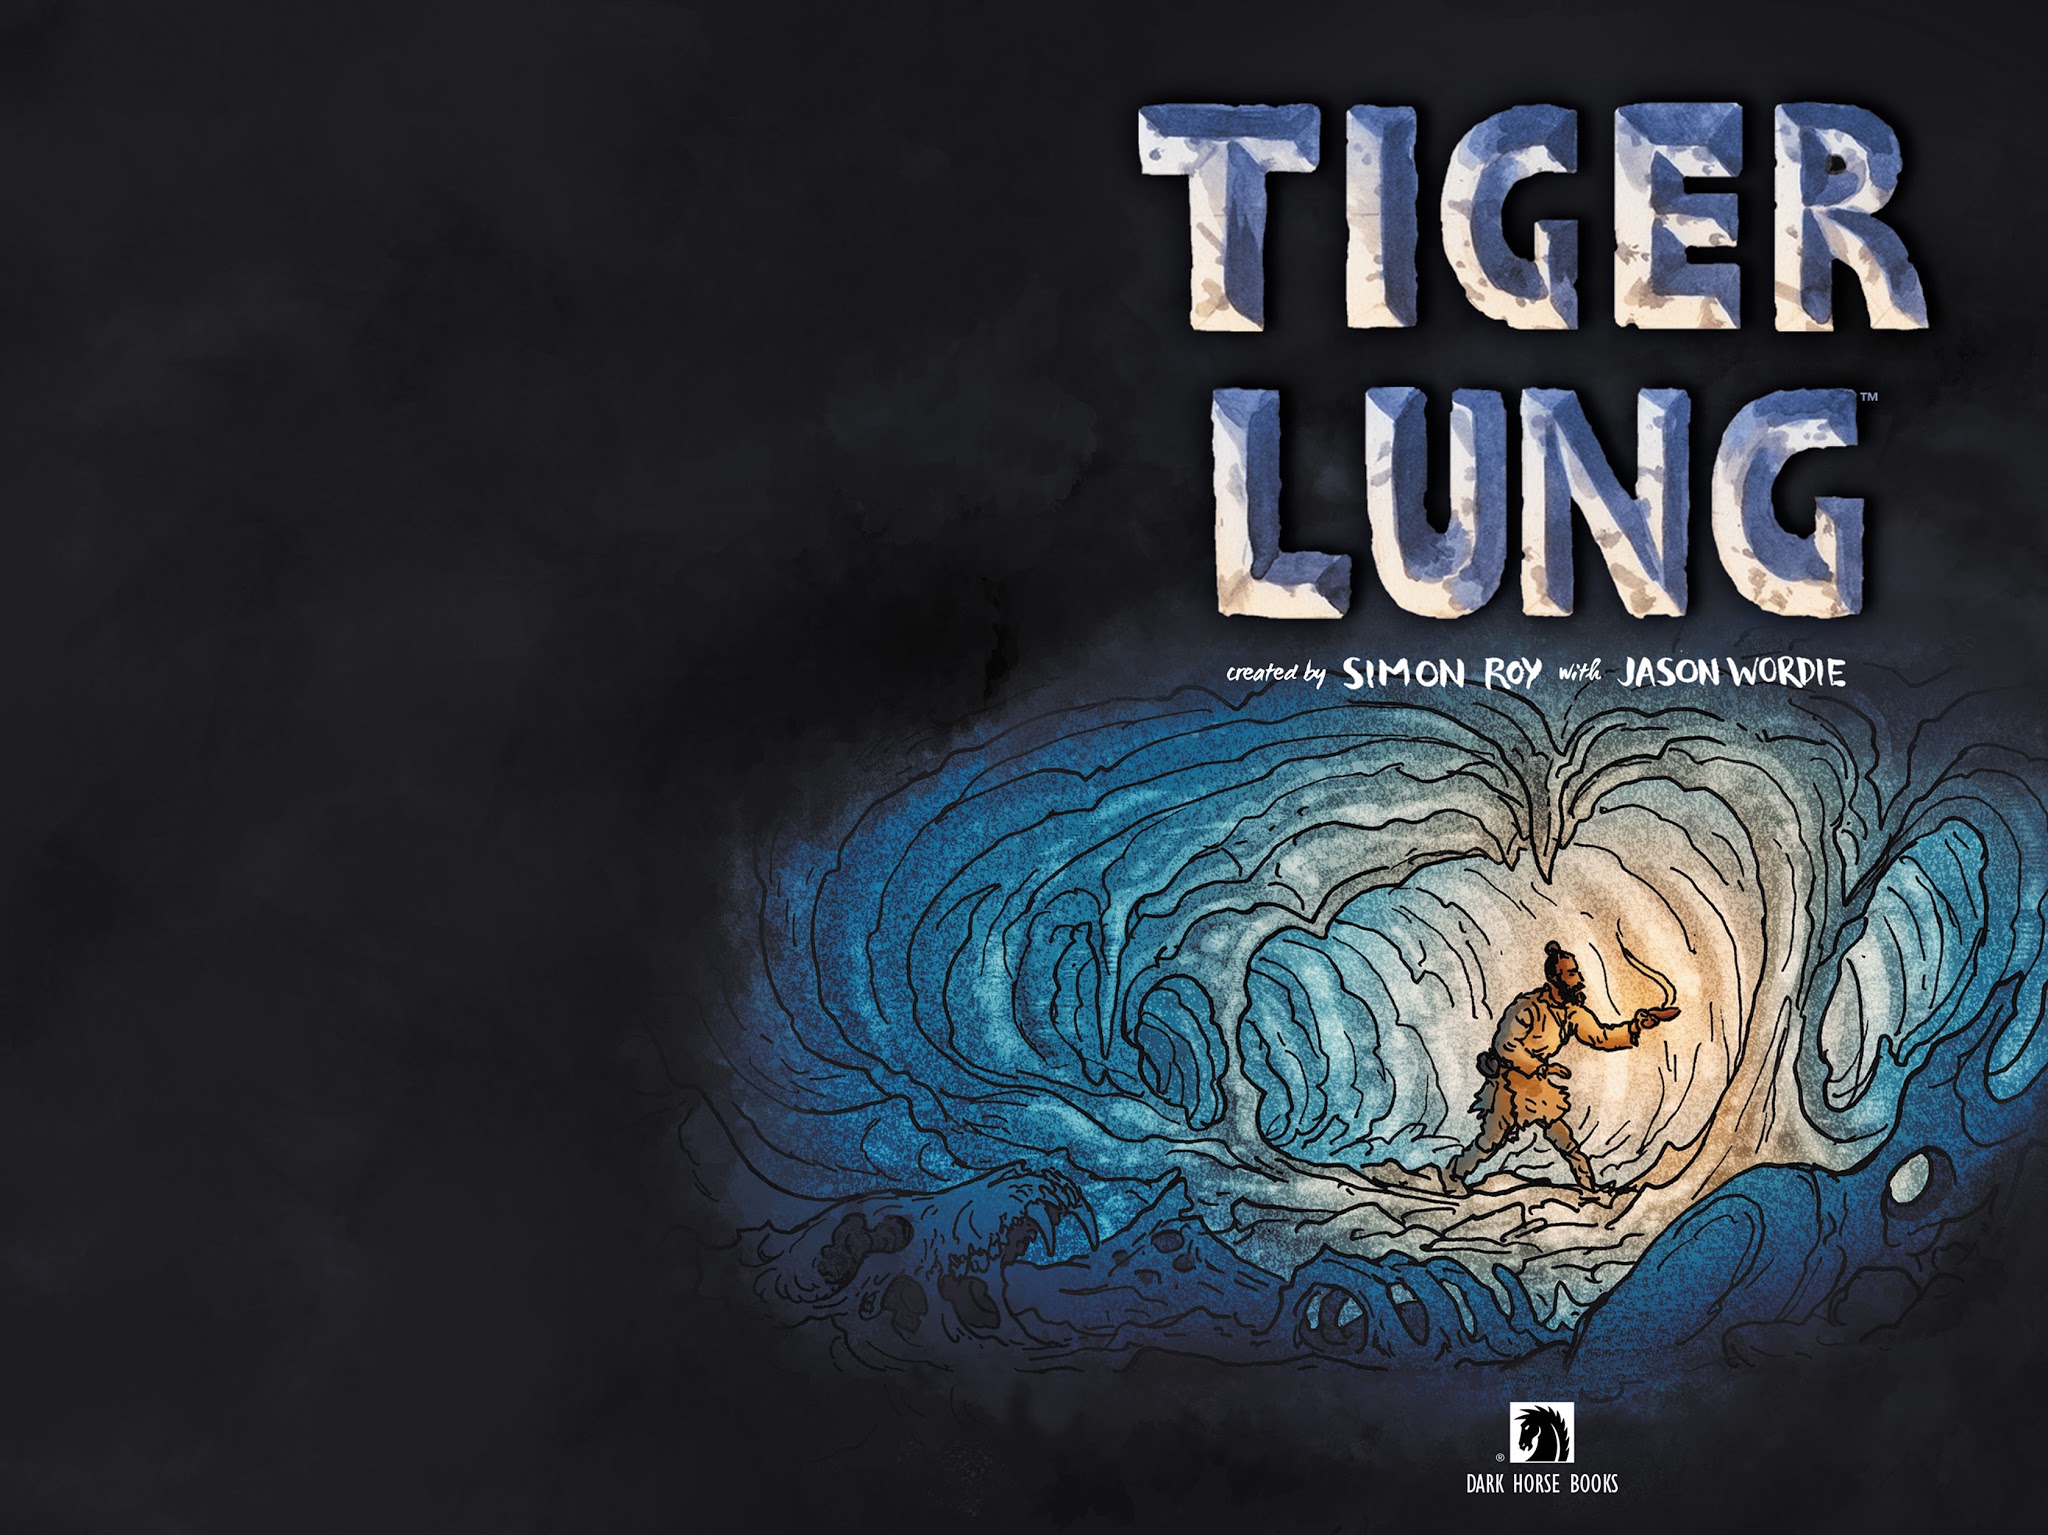 Read online Tiger Lung comic -  Issue # TPB - 4